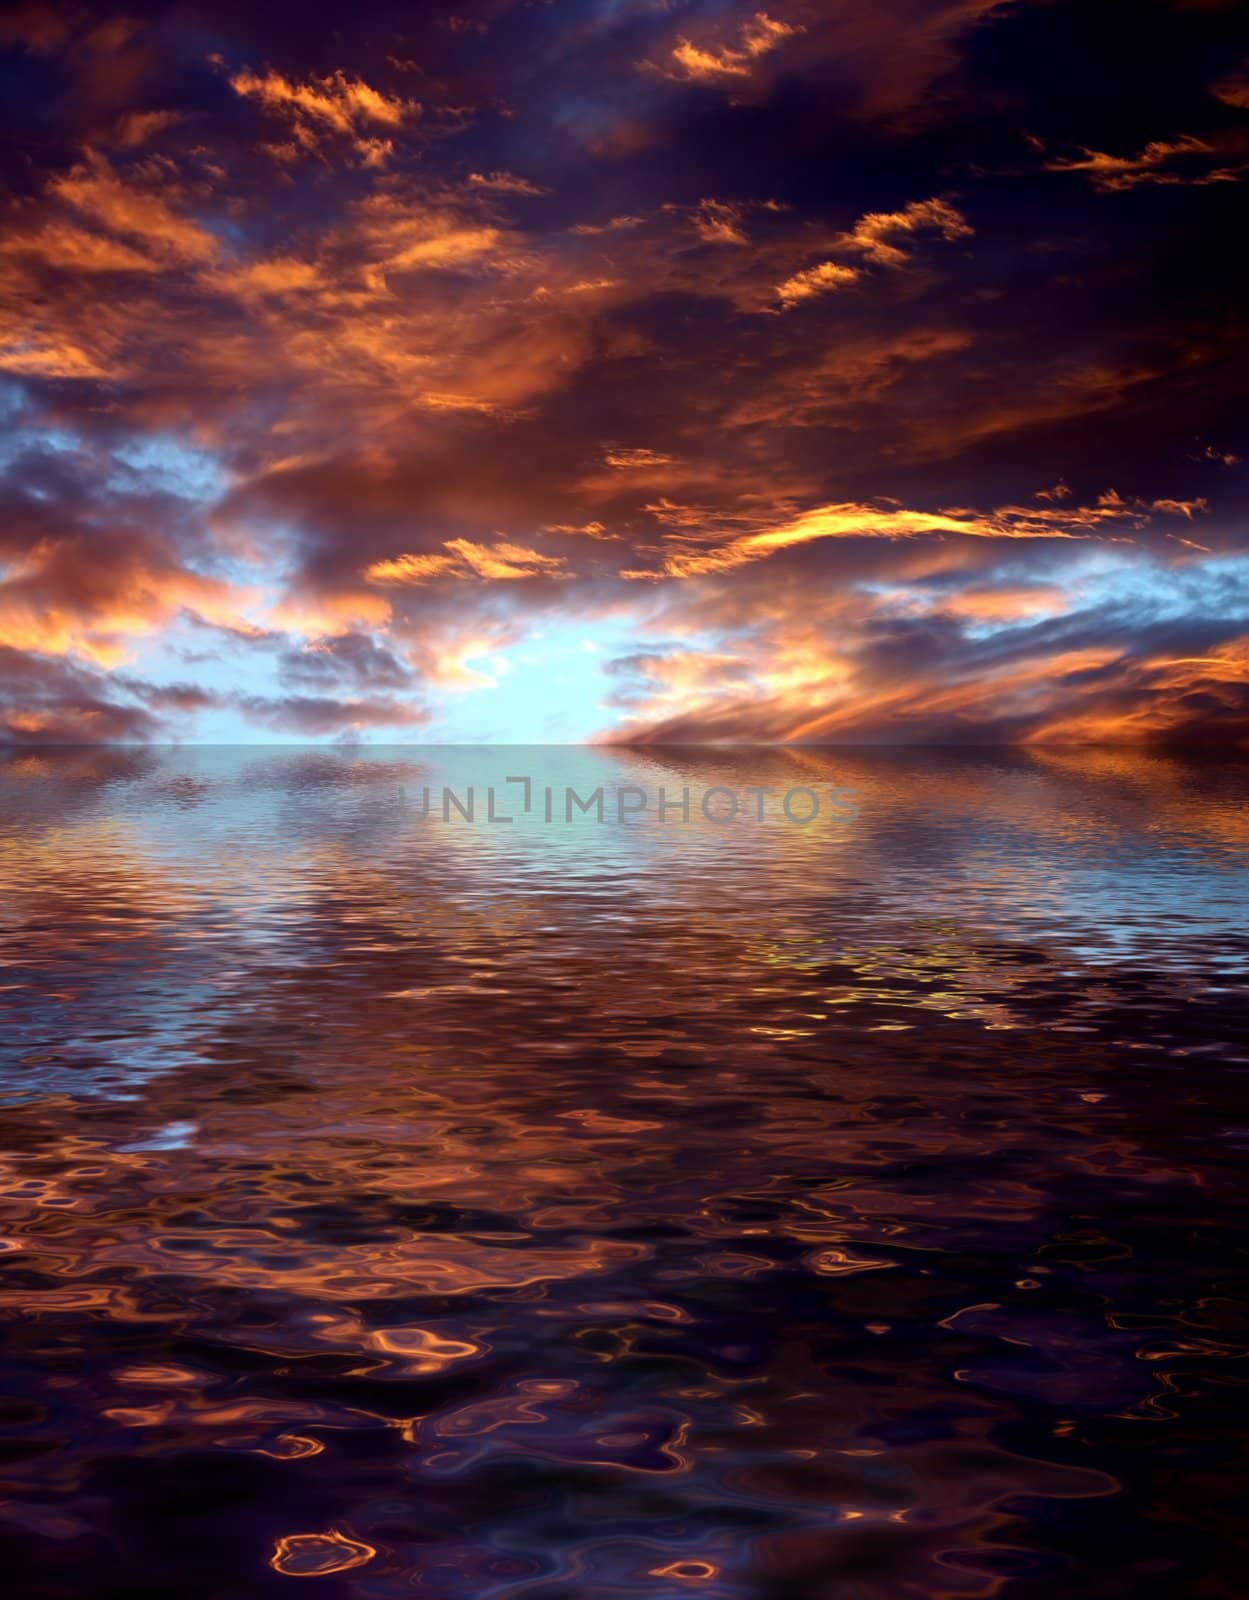 Cloudy sky with wavy reflection